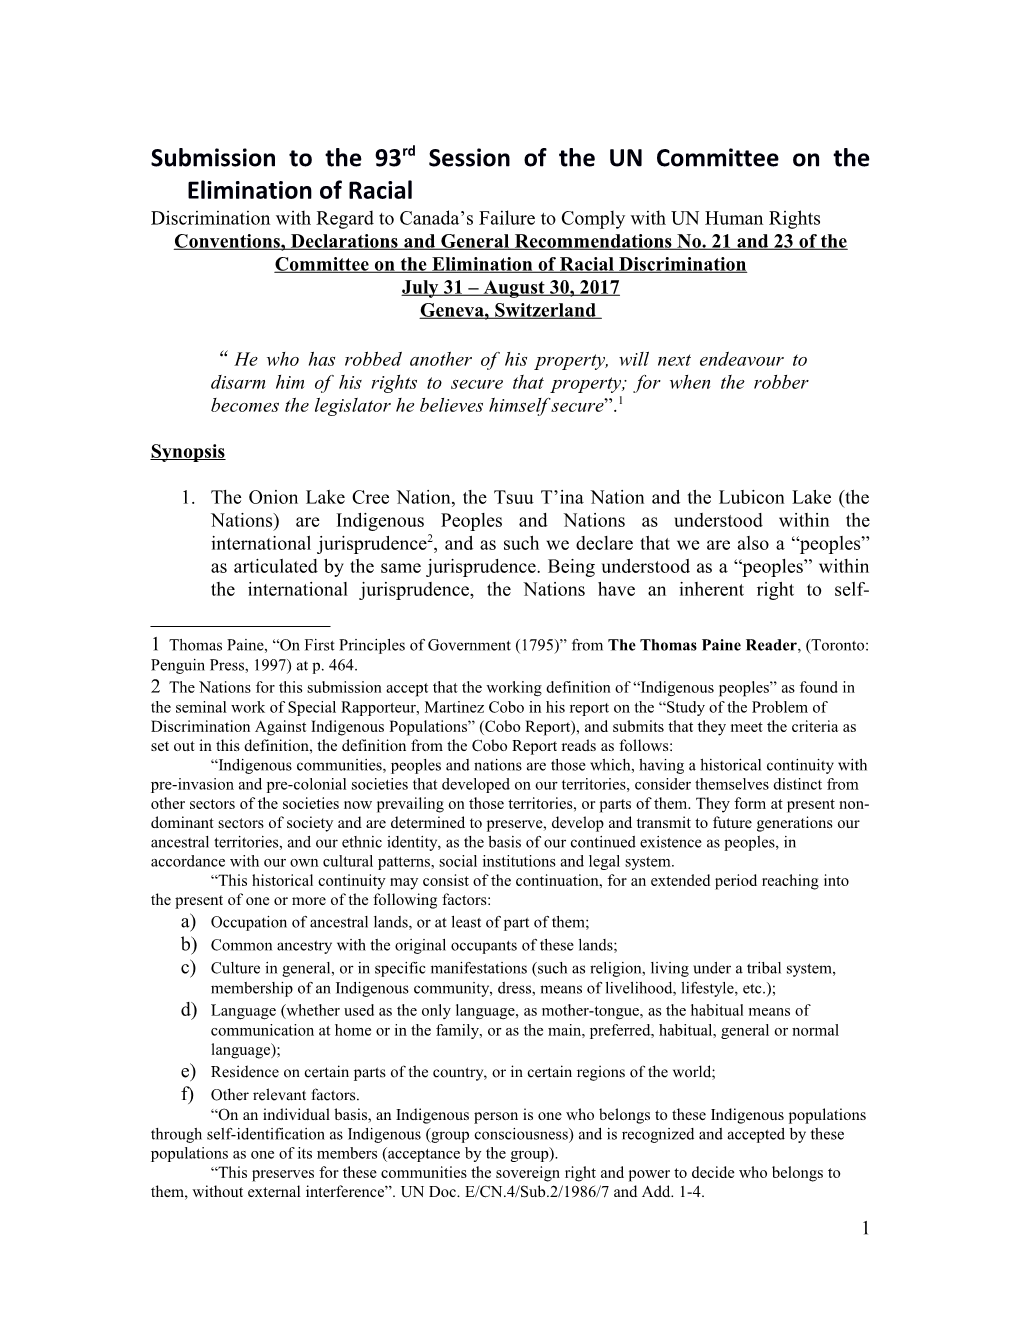 Submission to the 93Rd Session of the UN Committee on the Elimination of Racial